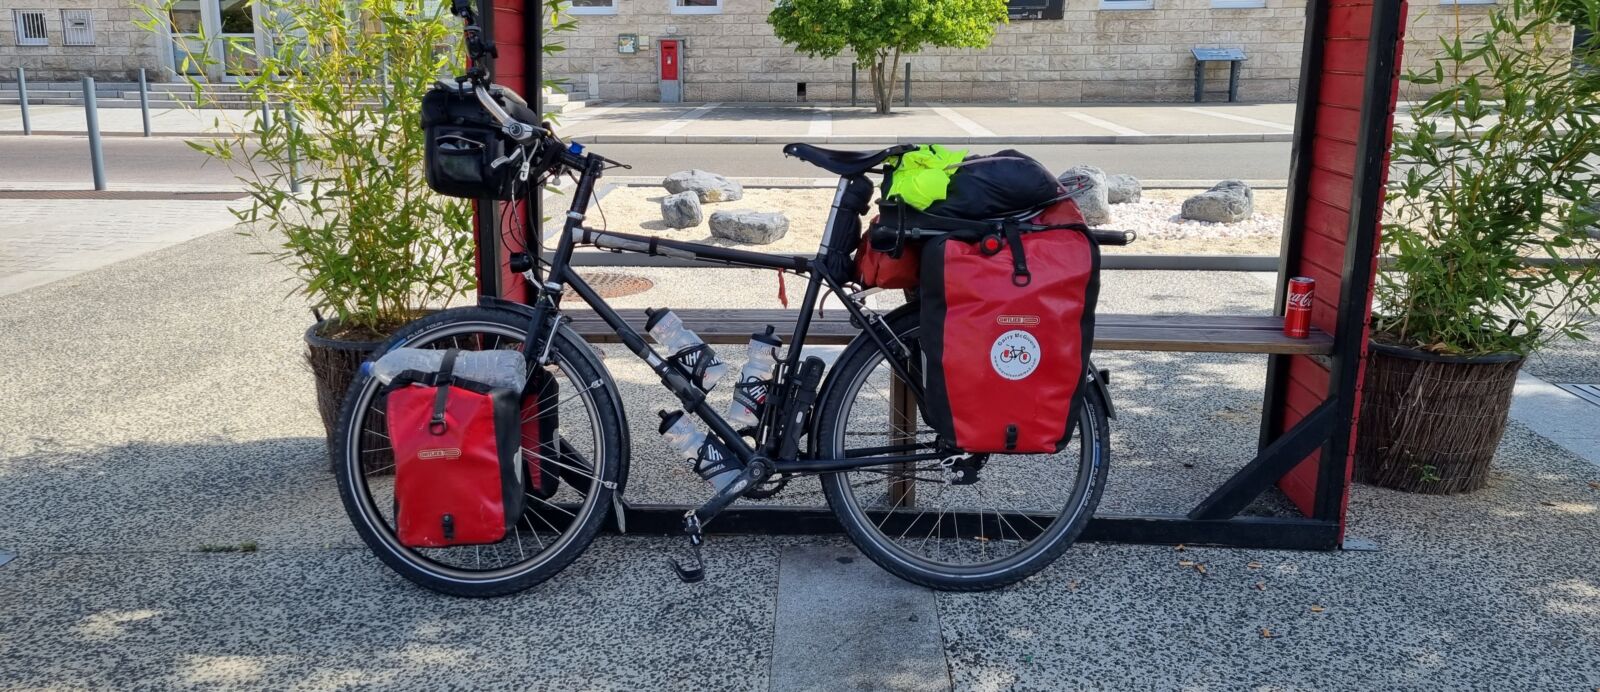 Bike with bags on